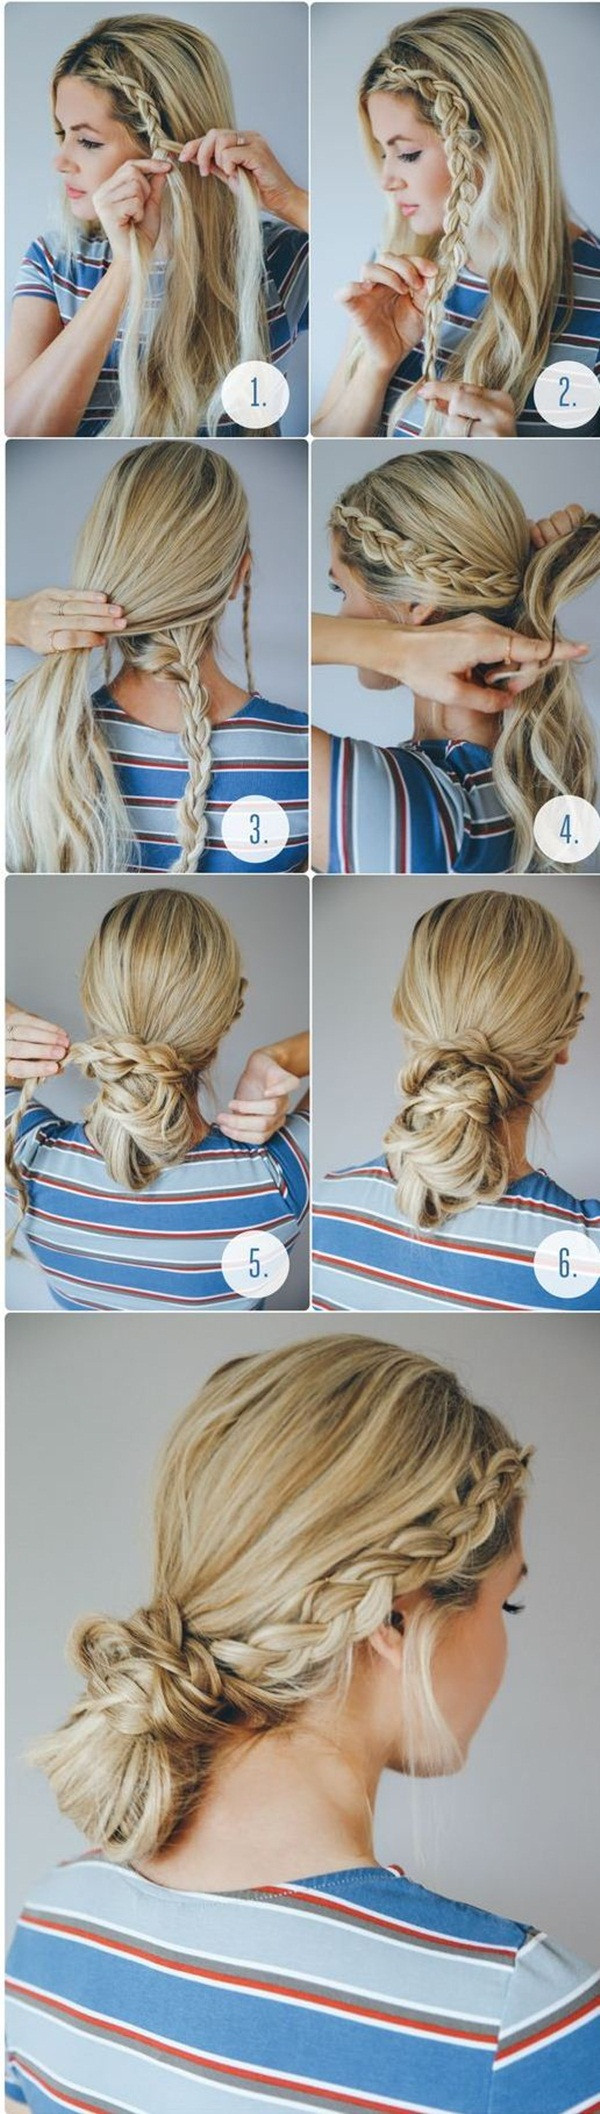 Easy And Cute Hairstyles For School
 40 Easy Hairstyles for Schools to Try in 2016